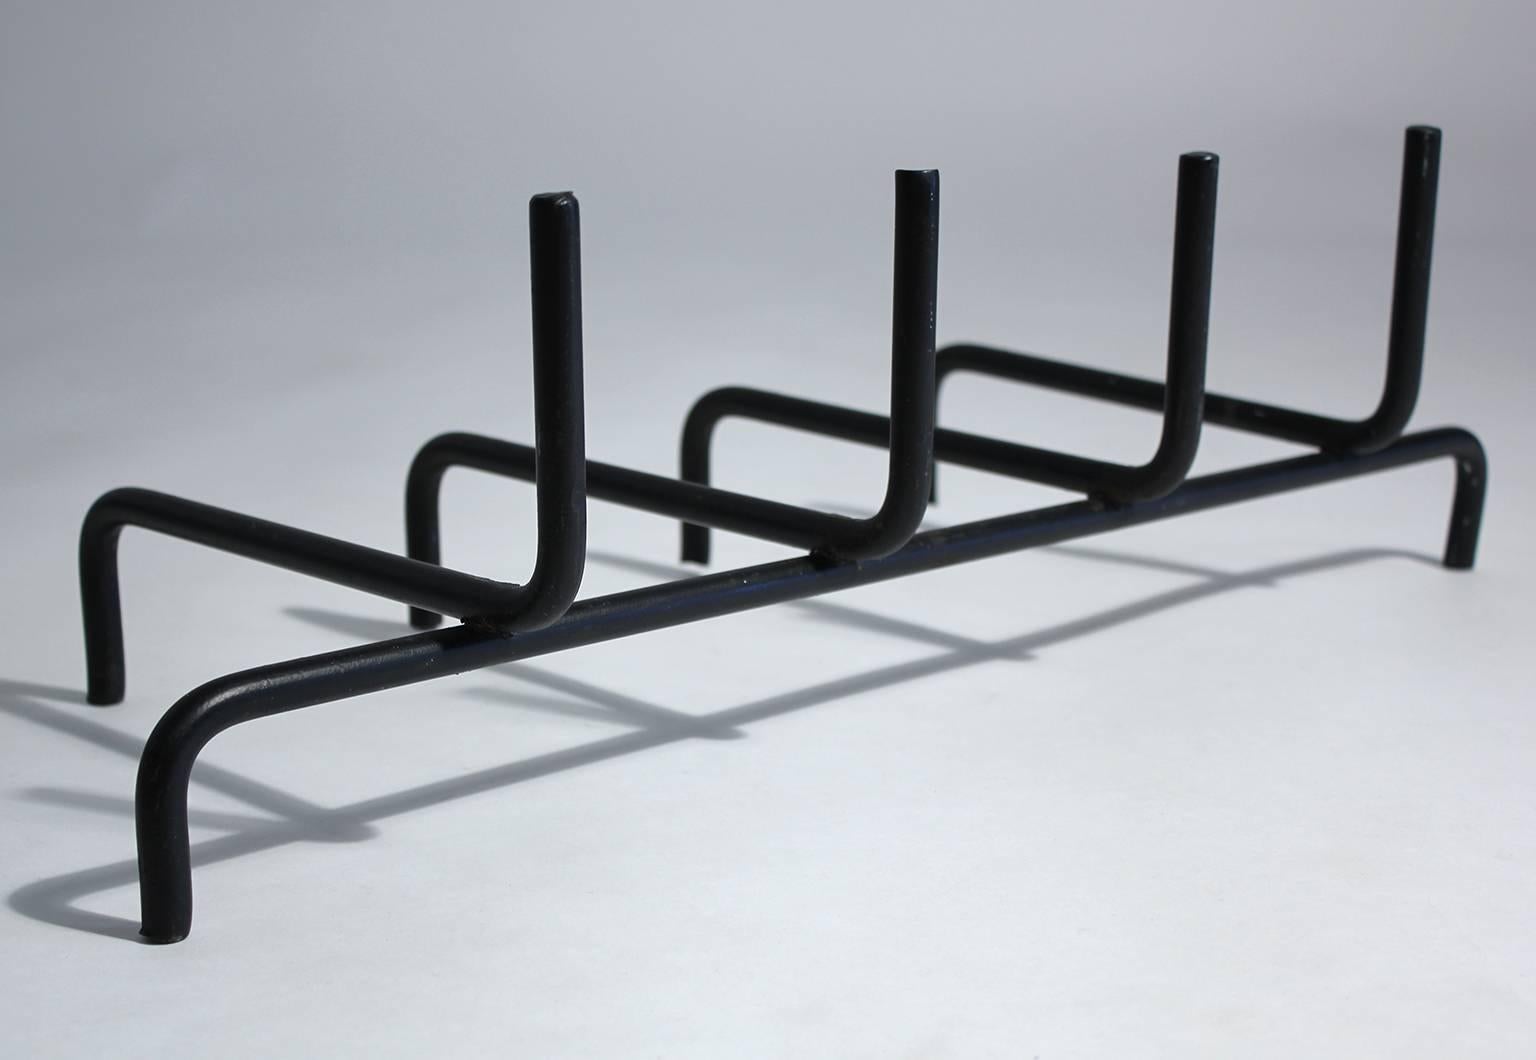 Vintage modern wrought iron fire grate or log holder of simple design and medium scale. Original paint in good condition.